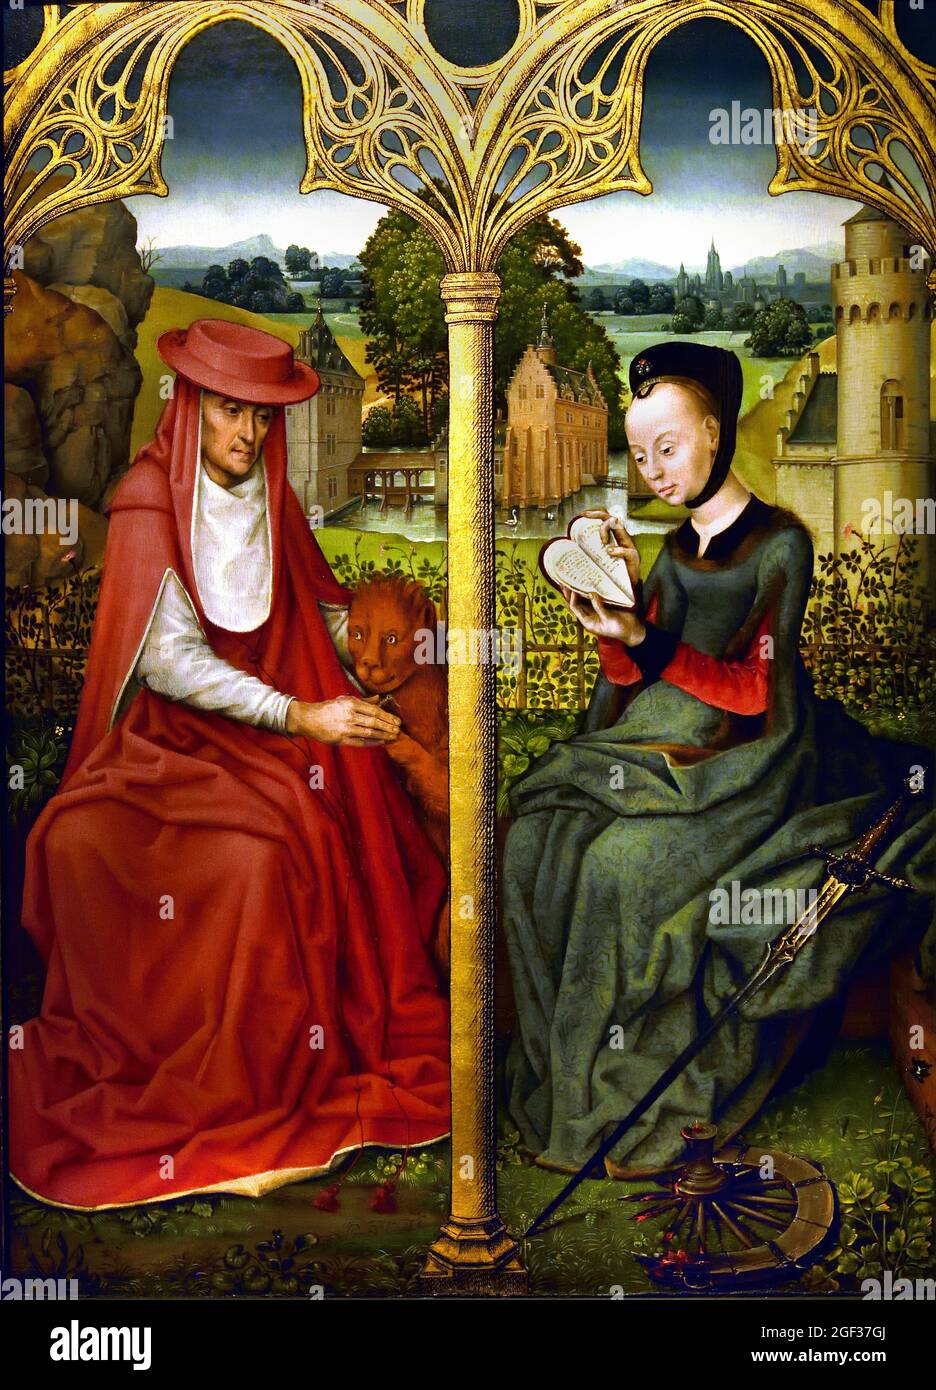 Saint Jerome and Saint Catherine of Alexandria, 1480 - 1490 oil paint, unknown painter  Bruges Belgian, Belgium, Flemish, , Hieronymus and Catharina are sitting on a sod bench in front of a rose hedge. Jerome on the lion, Catherine on the sword and the broken wheel. King's daughter Catharina was a role model for rich, courtly women.Precious heart-shaped book she is holding  contained secular love songs, Stock Photo